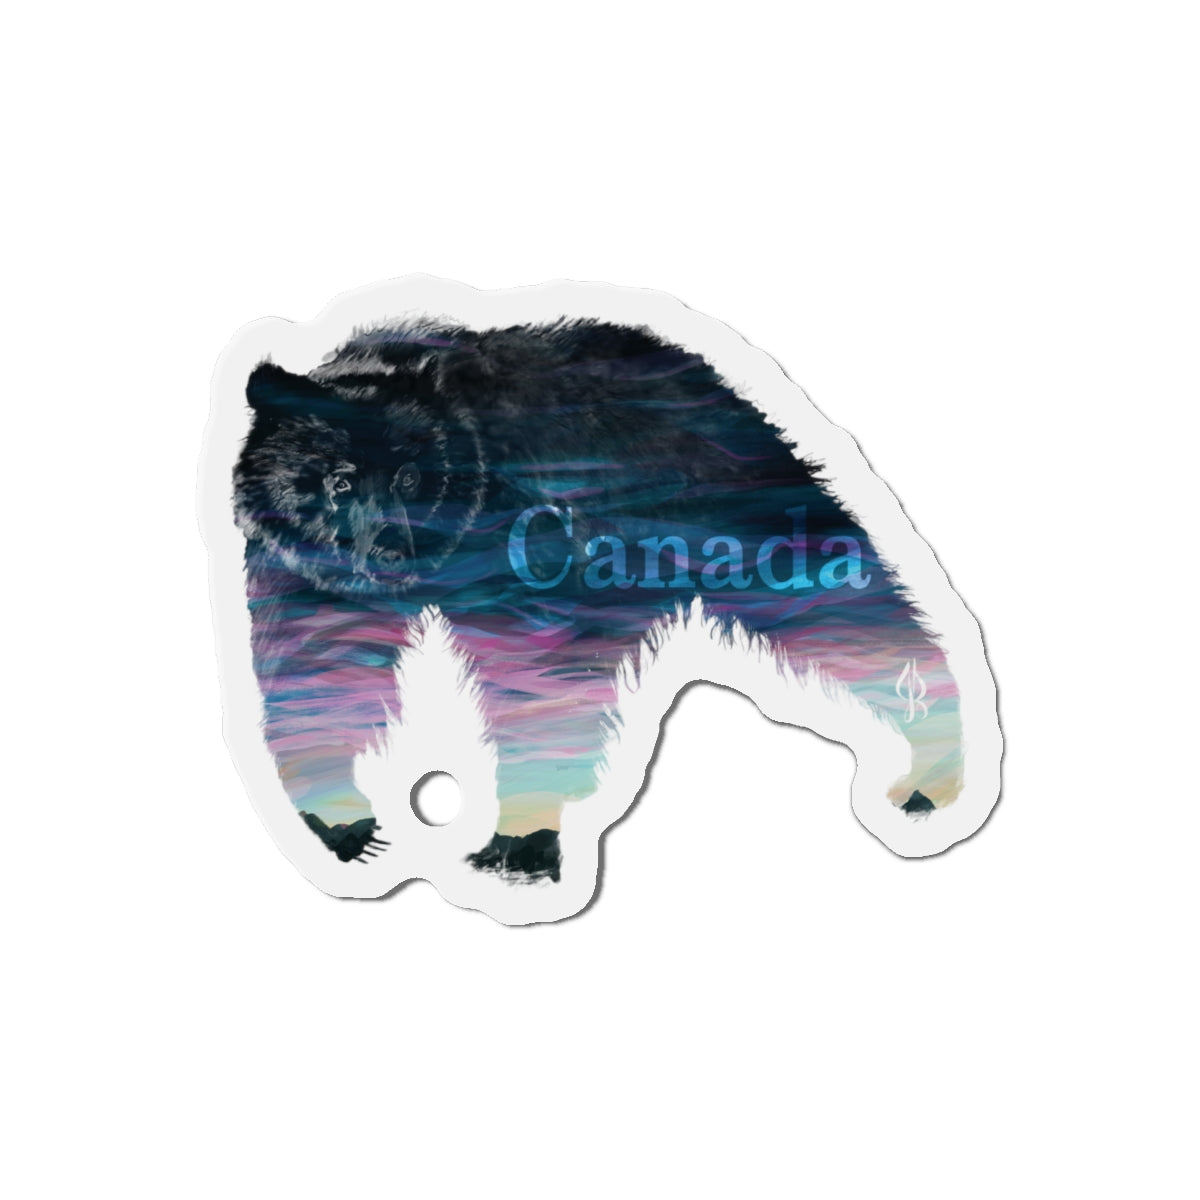 Canadian Grizzly Bear – Die-Cut Magnet